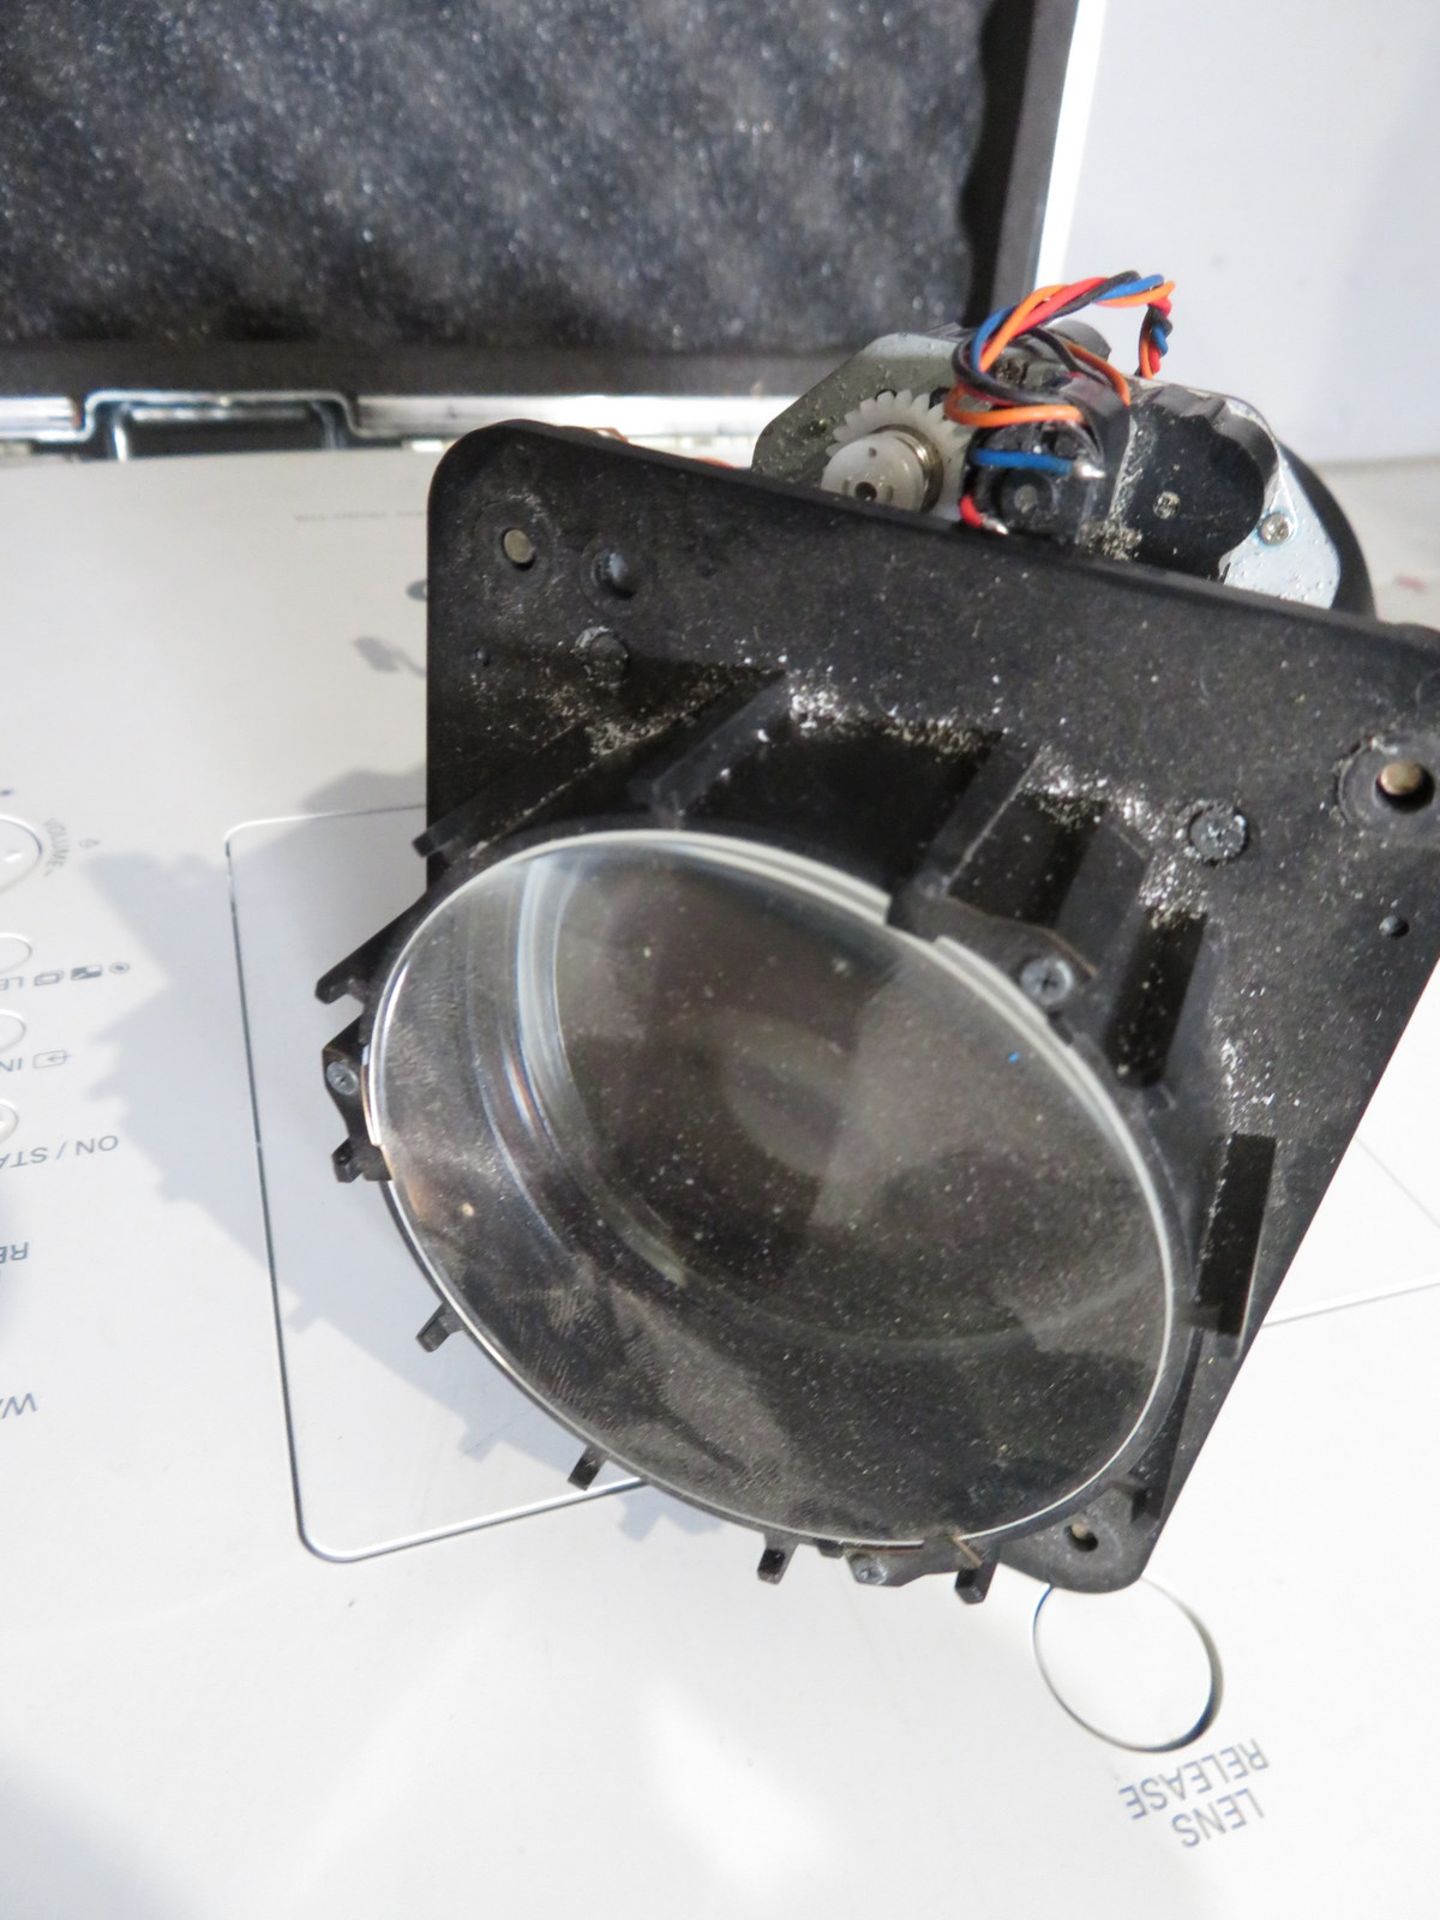 Sanyo XT25 Projector including lens in flightcase. Includes remote. Working condition. - Image 8 of 9